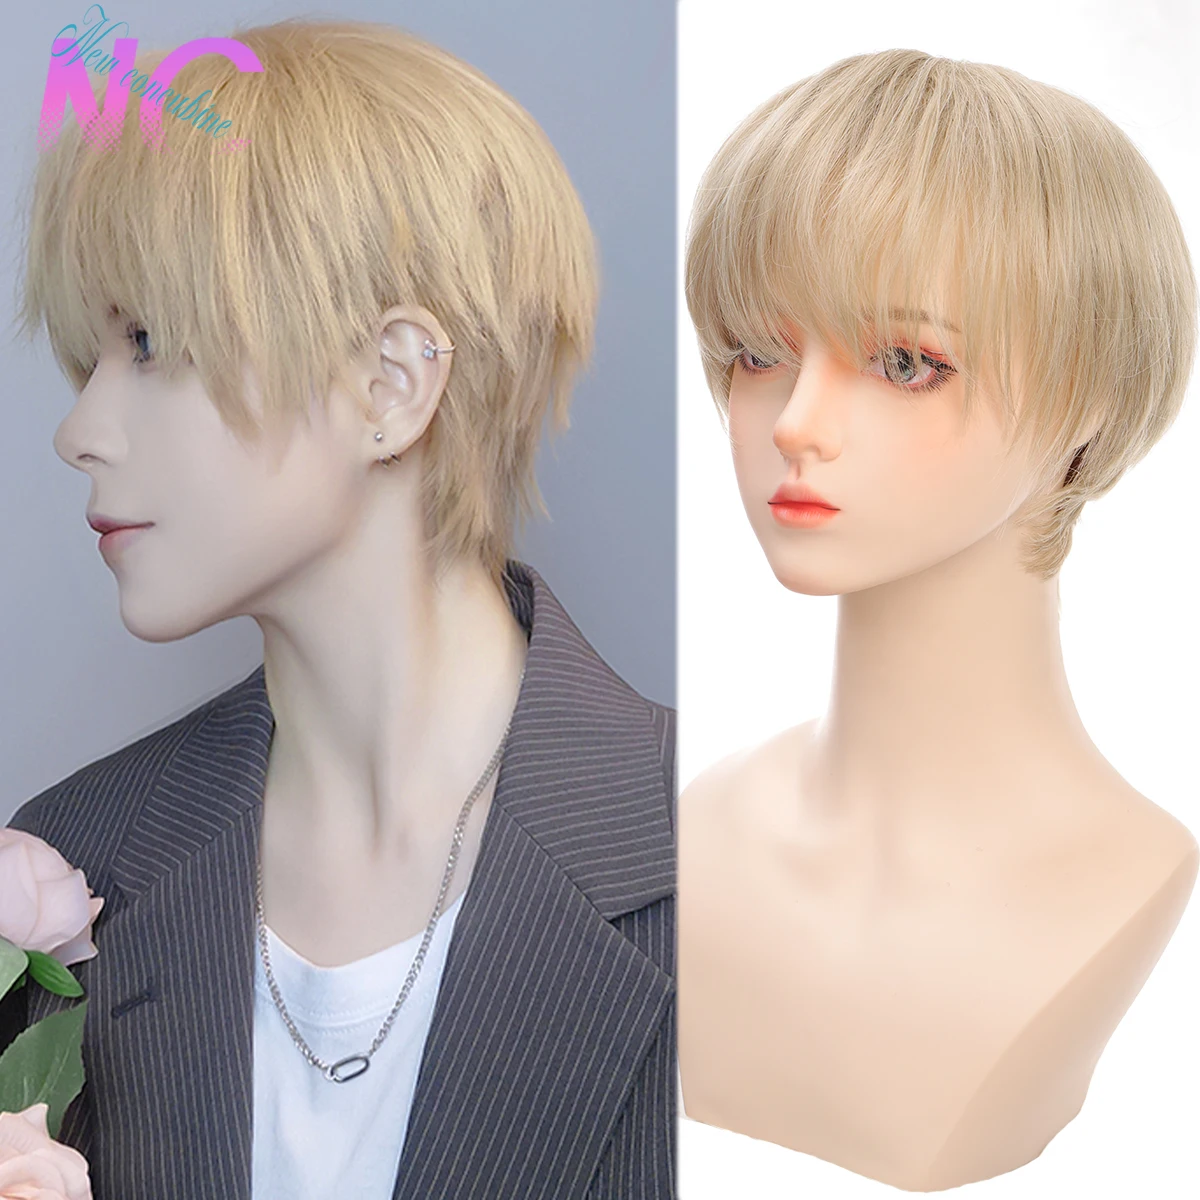 New Concubine Short Synthetic Mullet Head Wig Boy Black Gold Pink Cosplay Anime Fake Hair With Bangs Heat Resistant